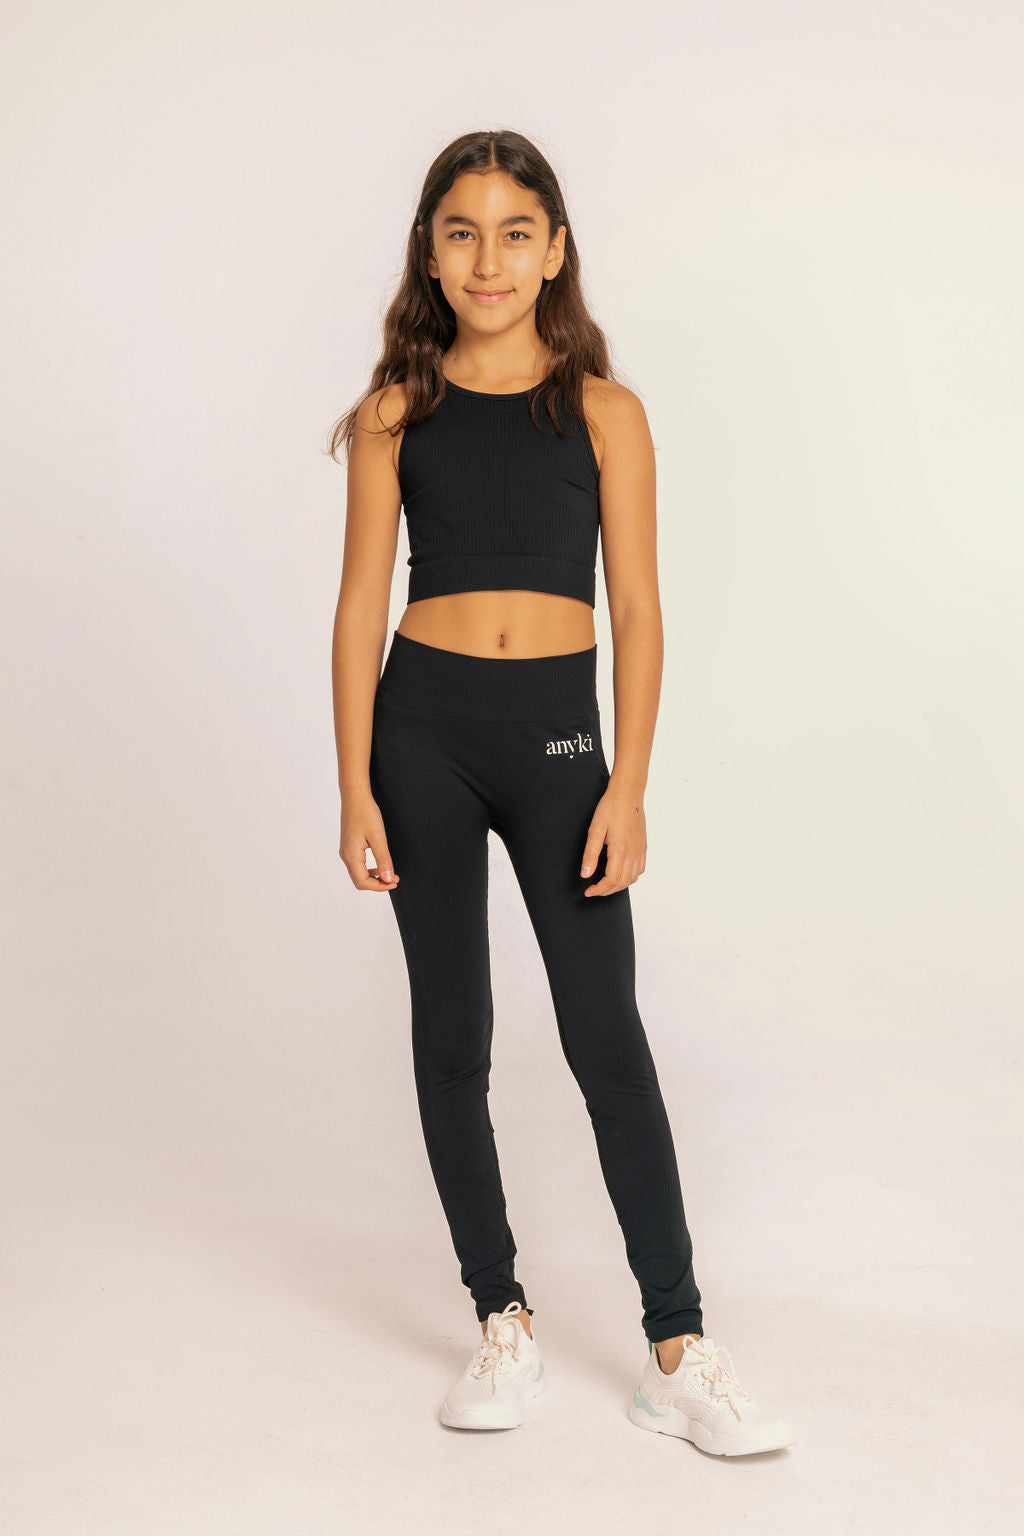 Black tights, Workout tights and leggings for girls